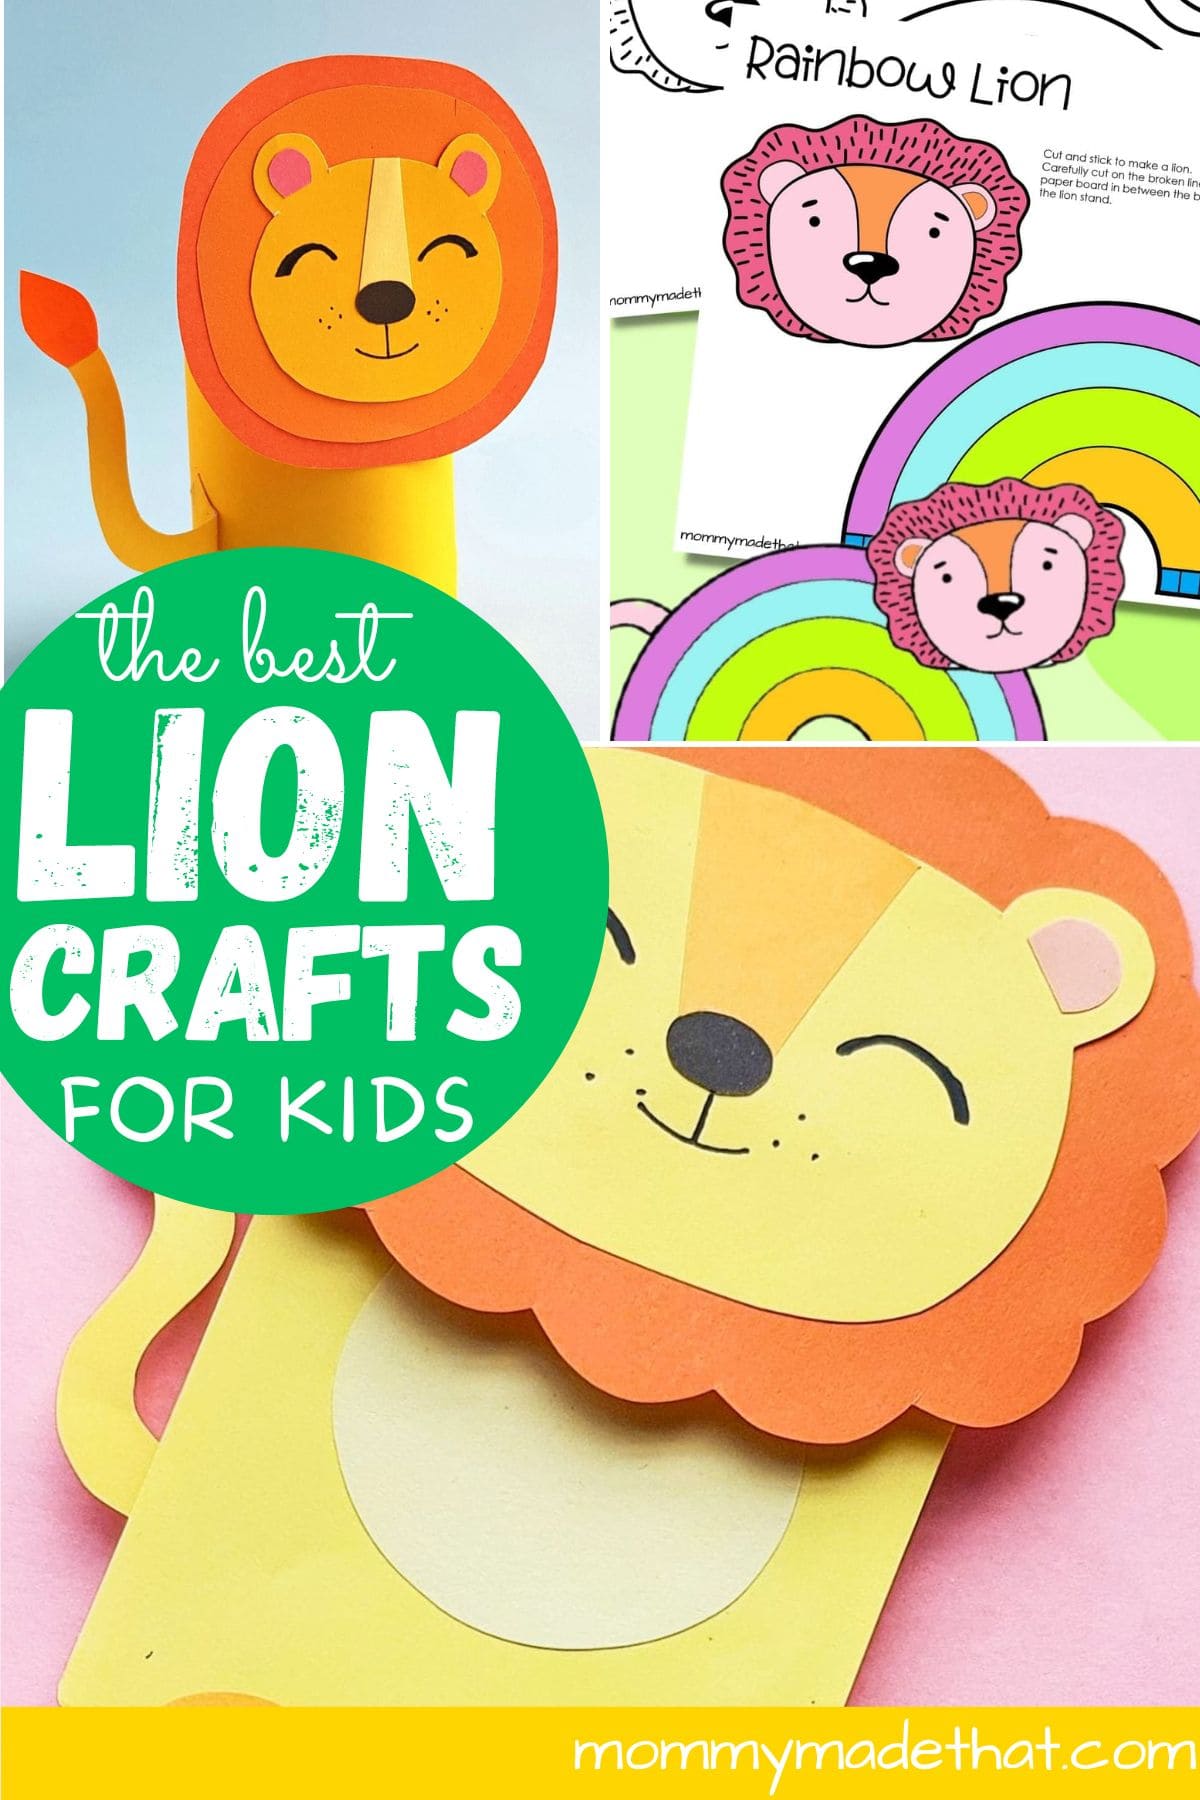 Lion Crafts & Activities for Kids